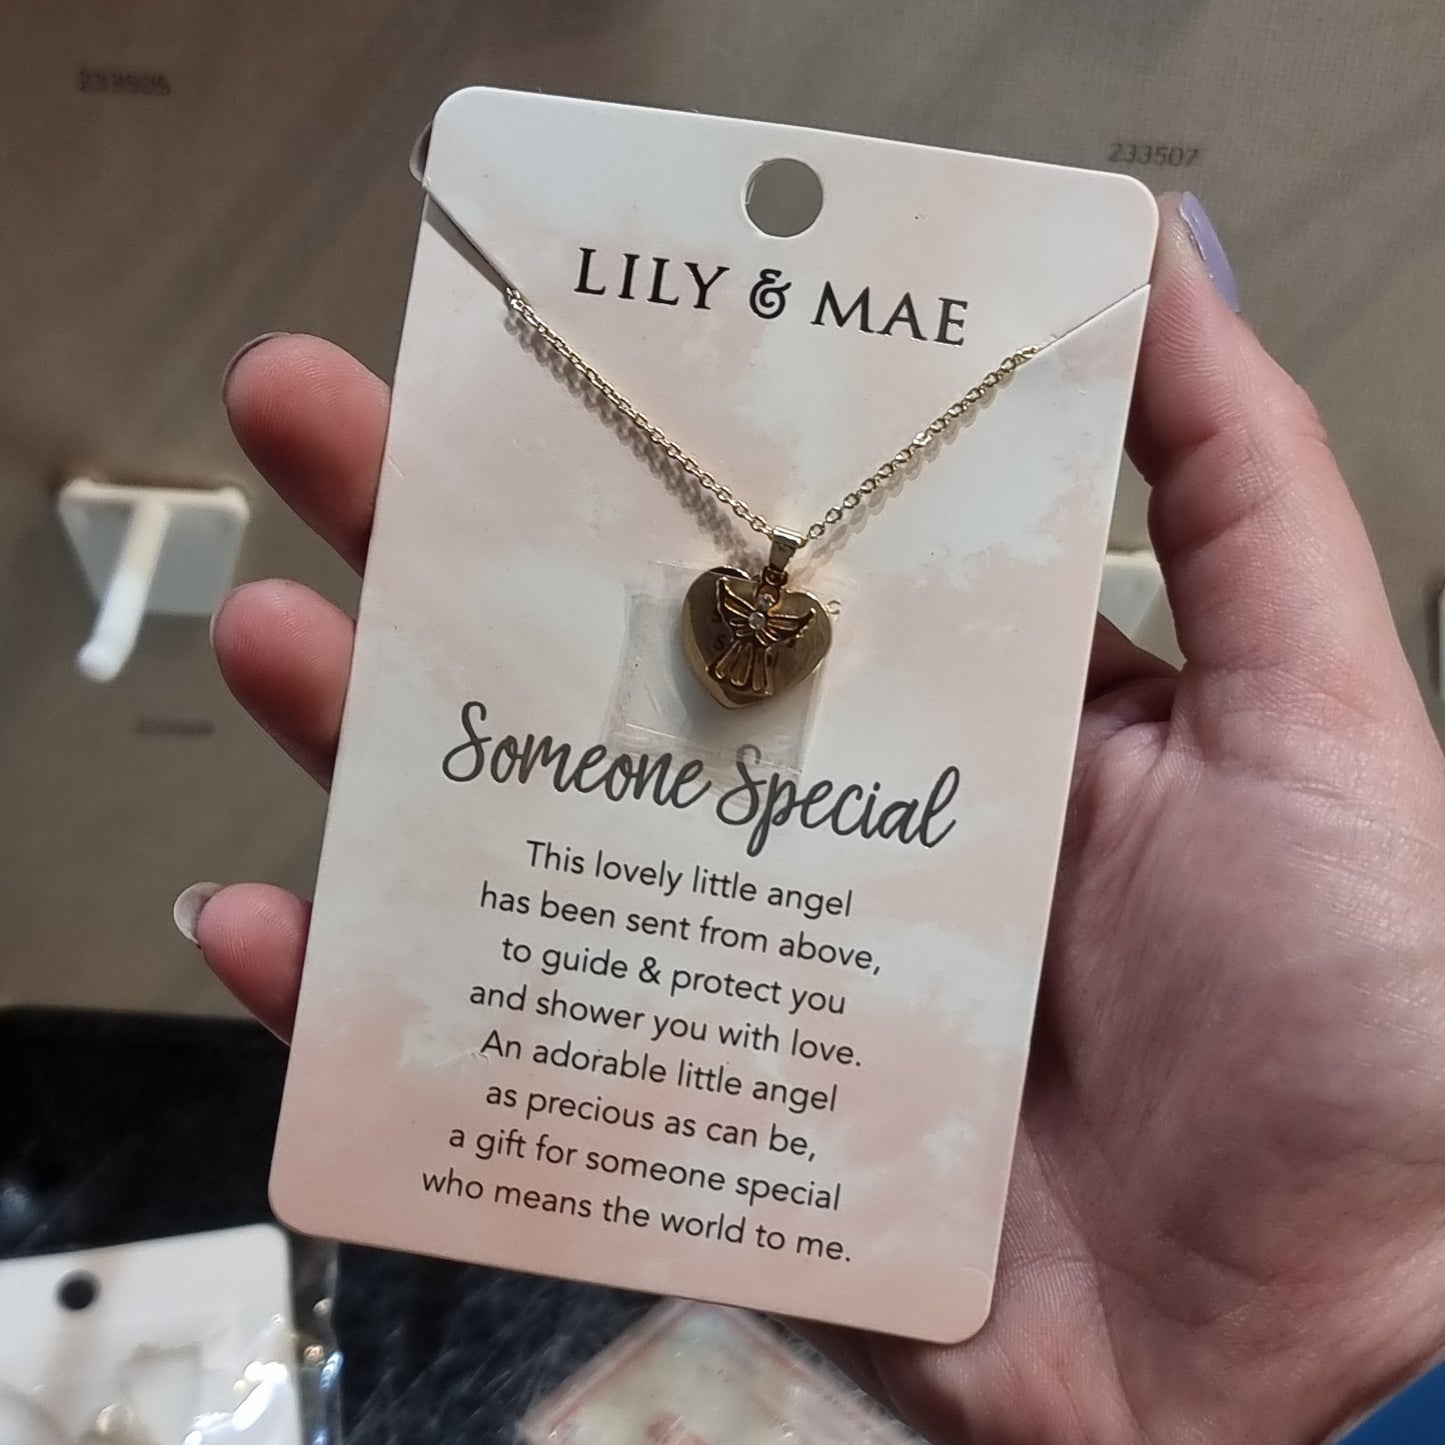 Someone special necklace - Rivendell Shop